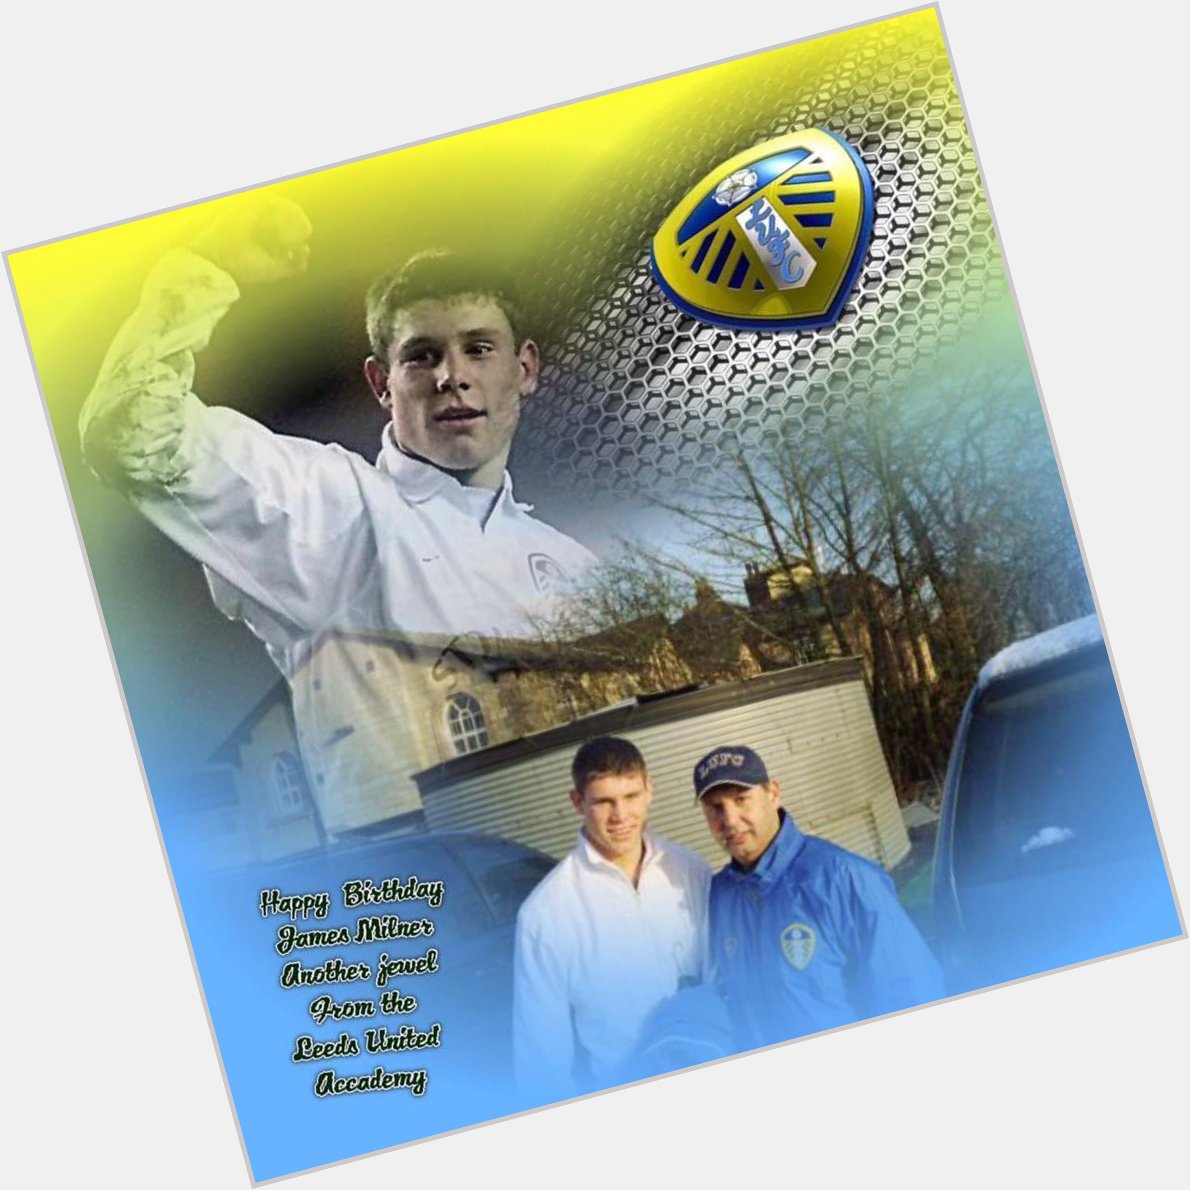 JAMES MILNER  - Happy Birthday to a Great Professional friend from the Leeds United Academy !!! 